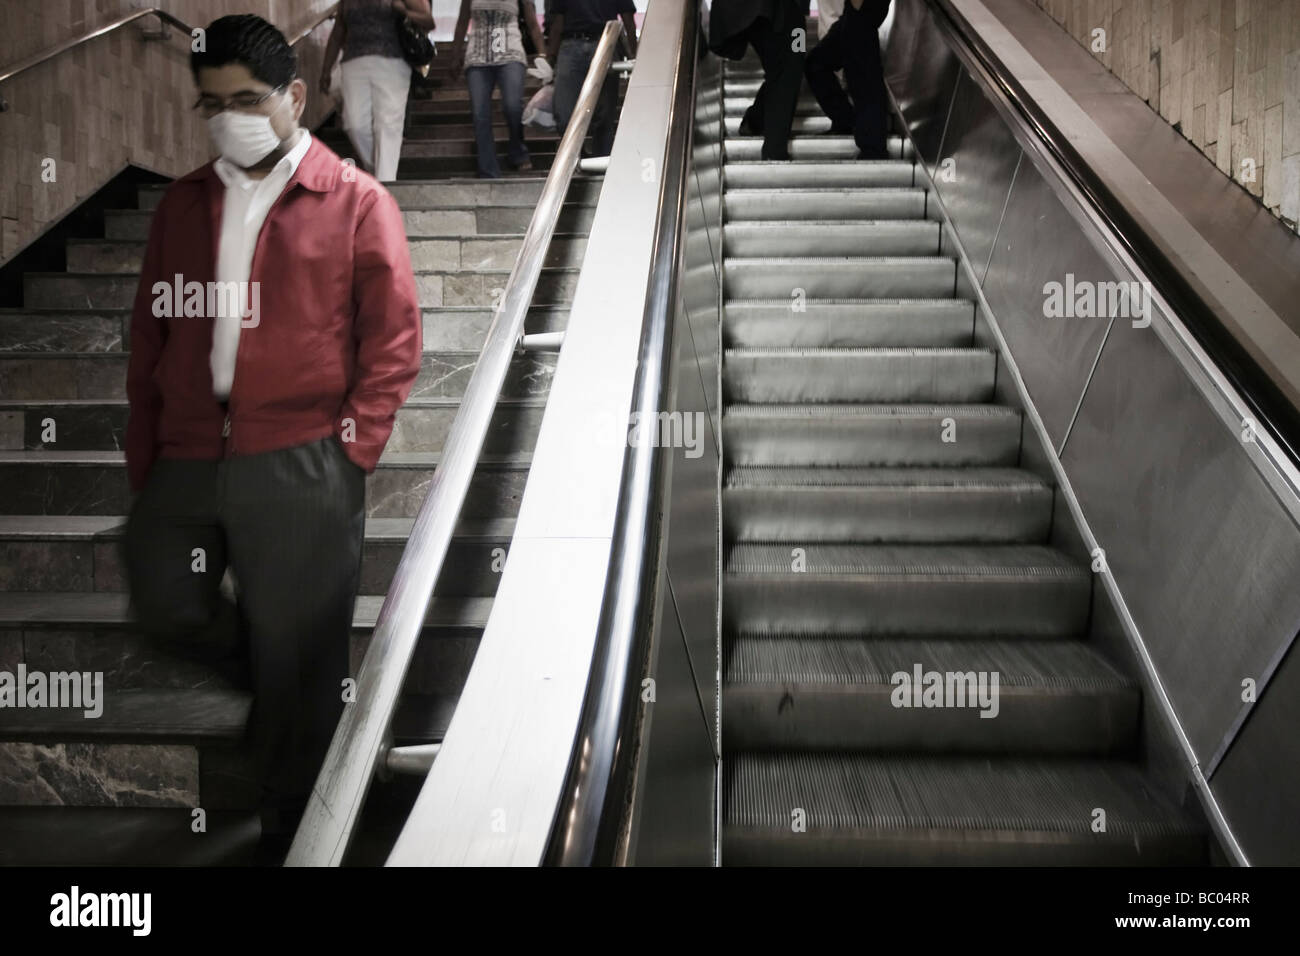 A man wearing a mask in the stairway of the subway (metro) station during the swine flu epidemic in Mexico City, DF, Mexico. Stock Photo